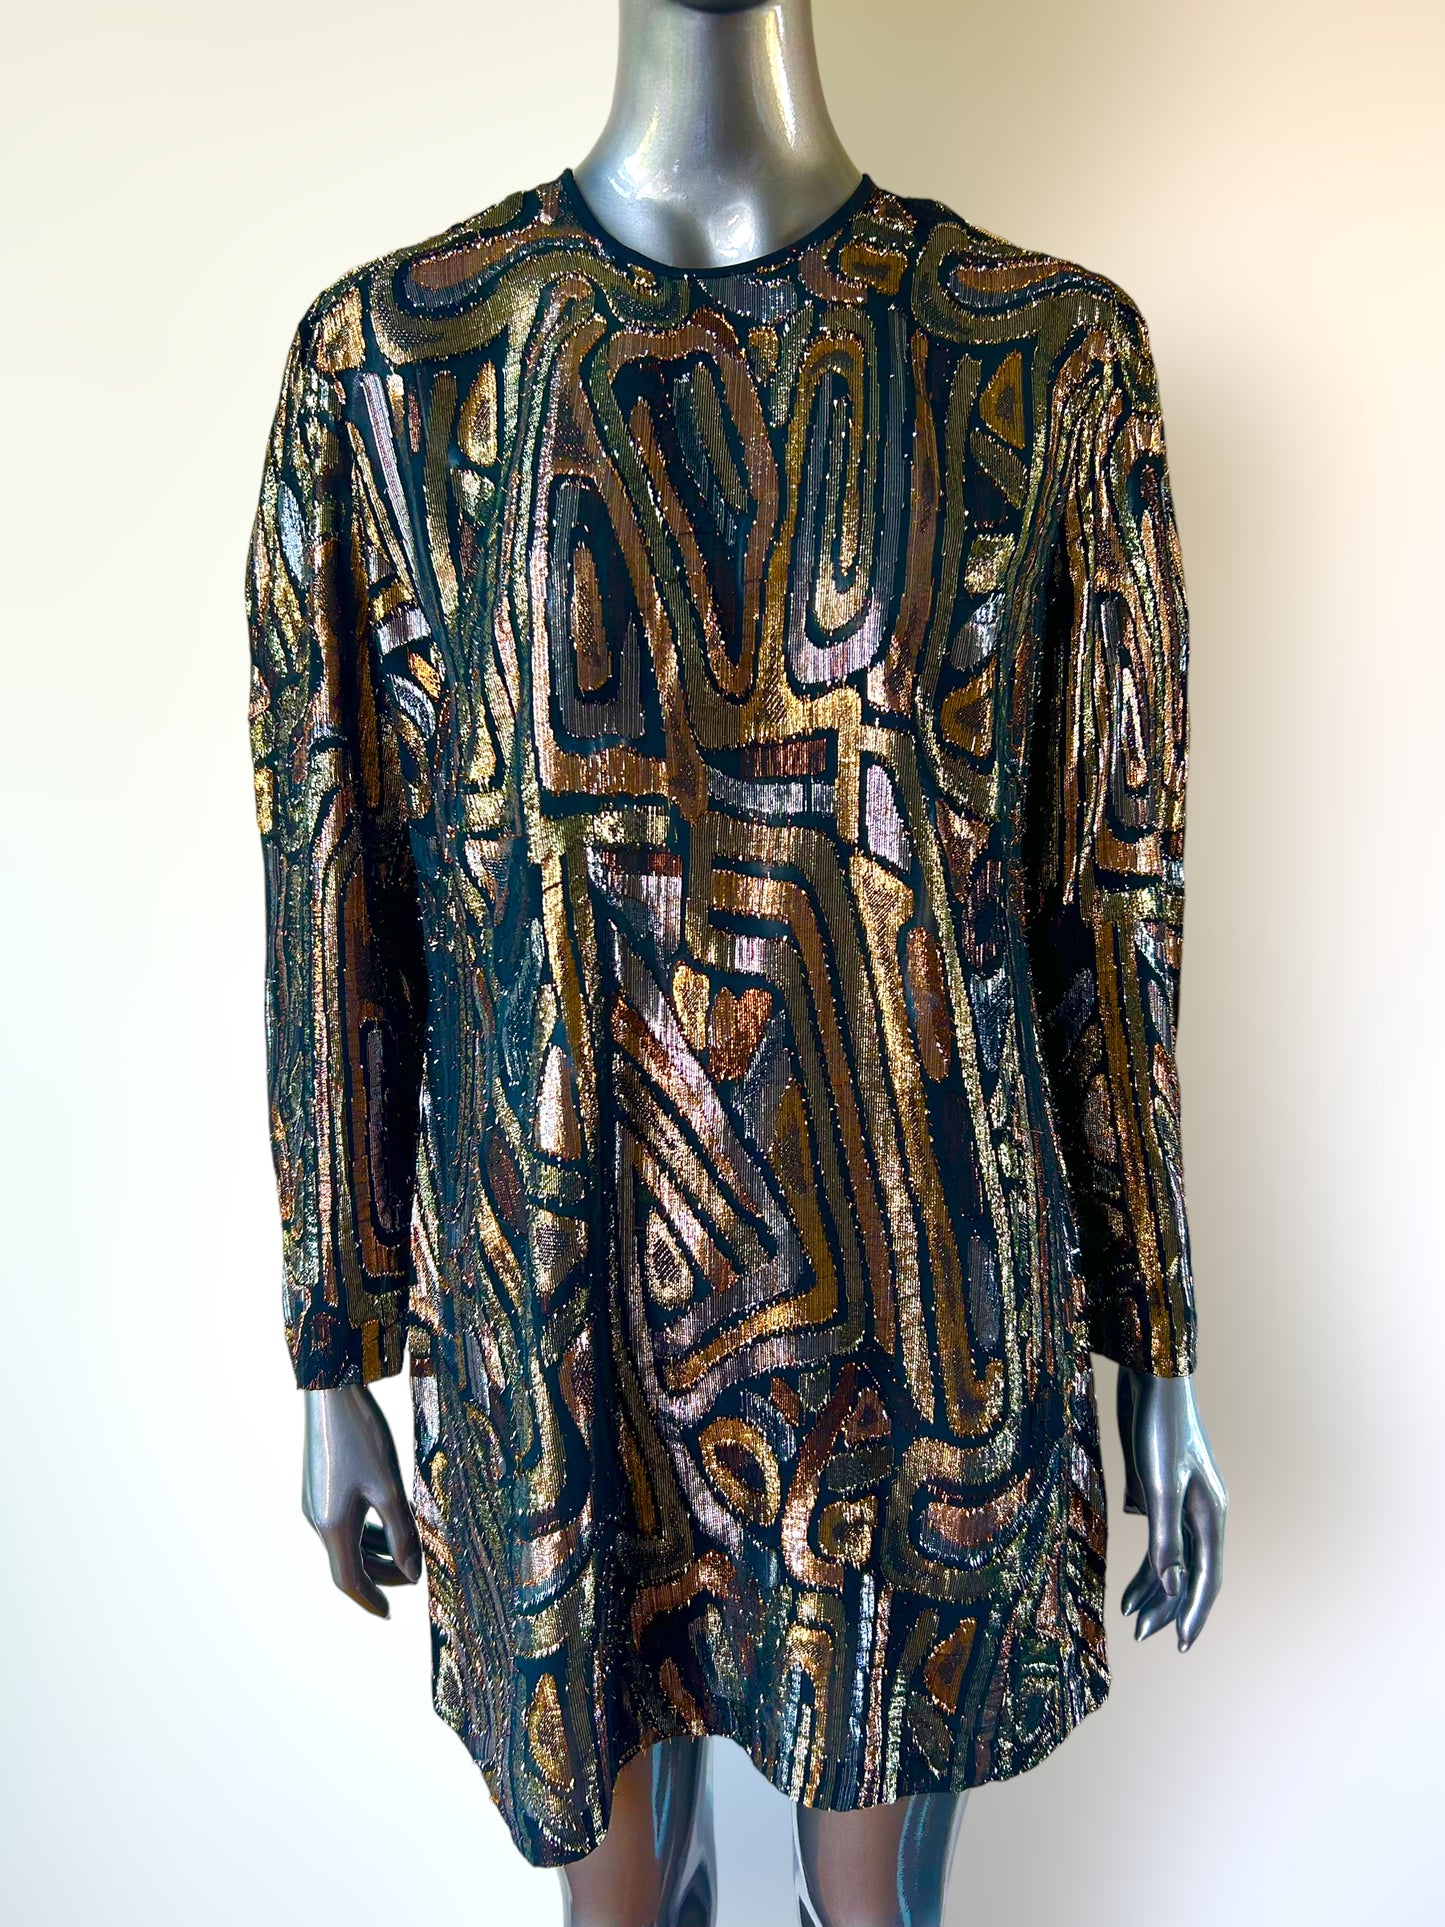 Vintage 1980s French Lame Metallic Tunic in hues of Gold, Silver and Bronze